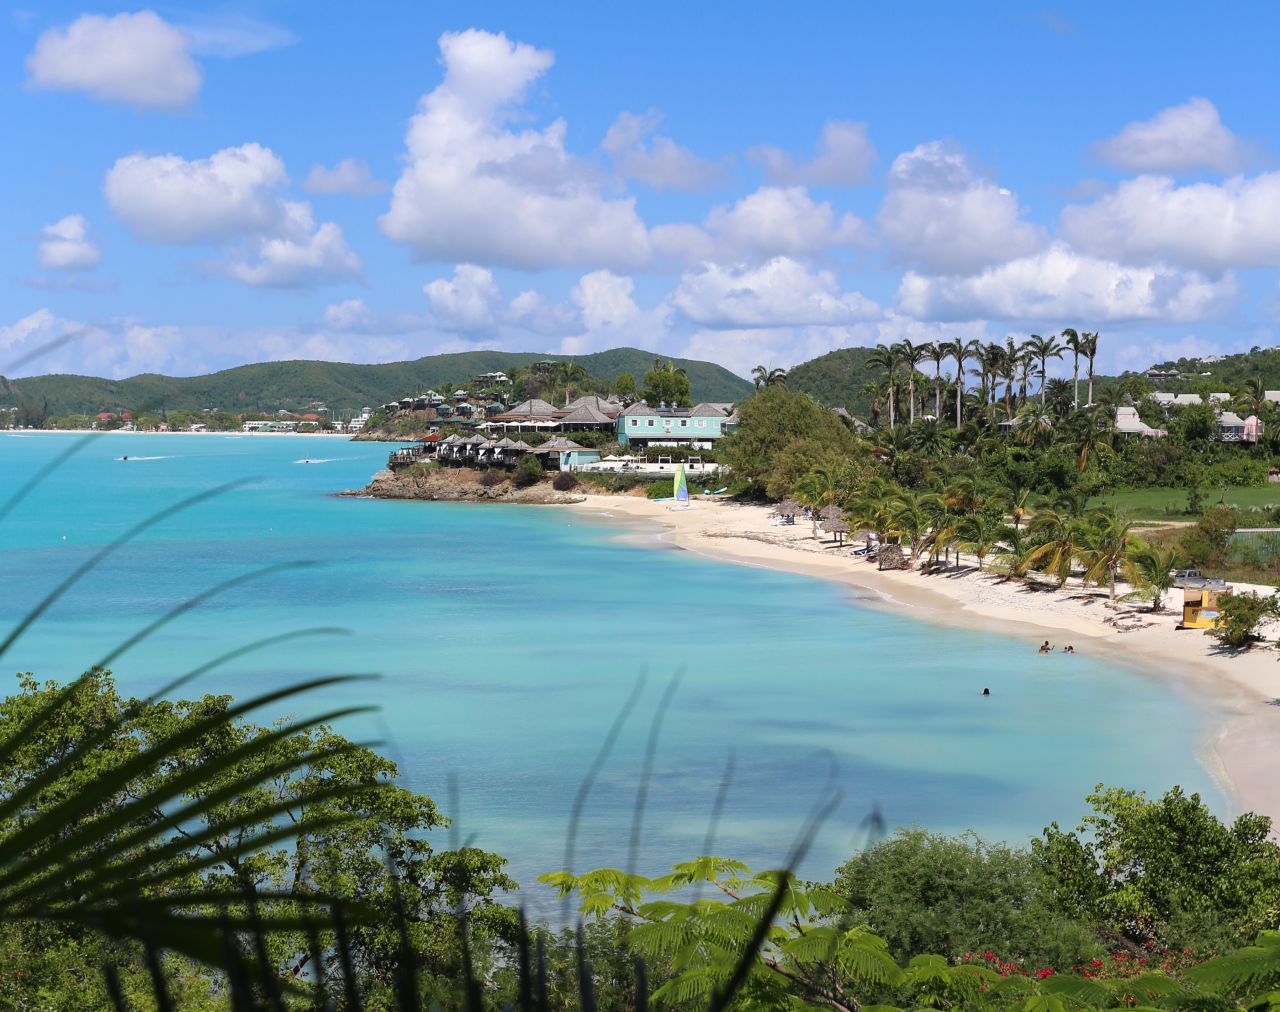 <strong>A beach a day: </strong>Antigua boasts 365 beaches. While it may be difficult to count them all, Little Ffryes Beach is one of the most idyllic.